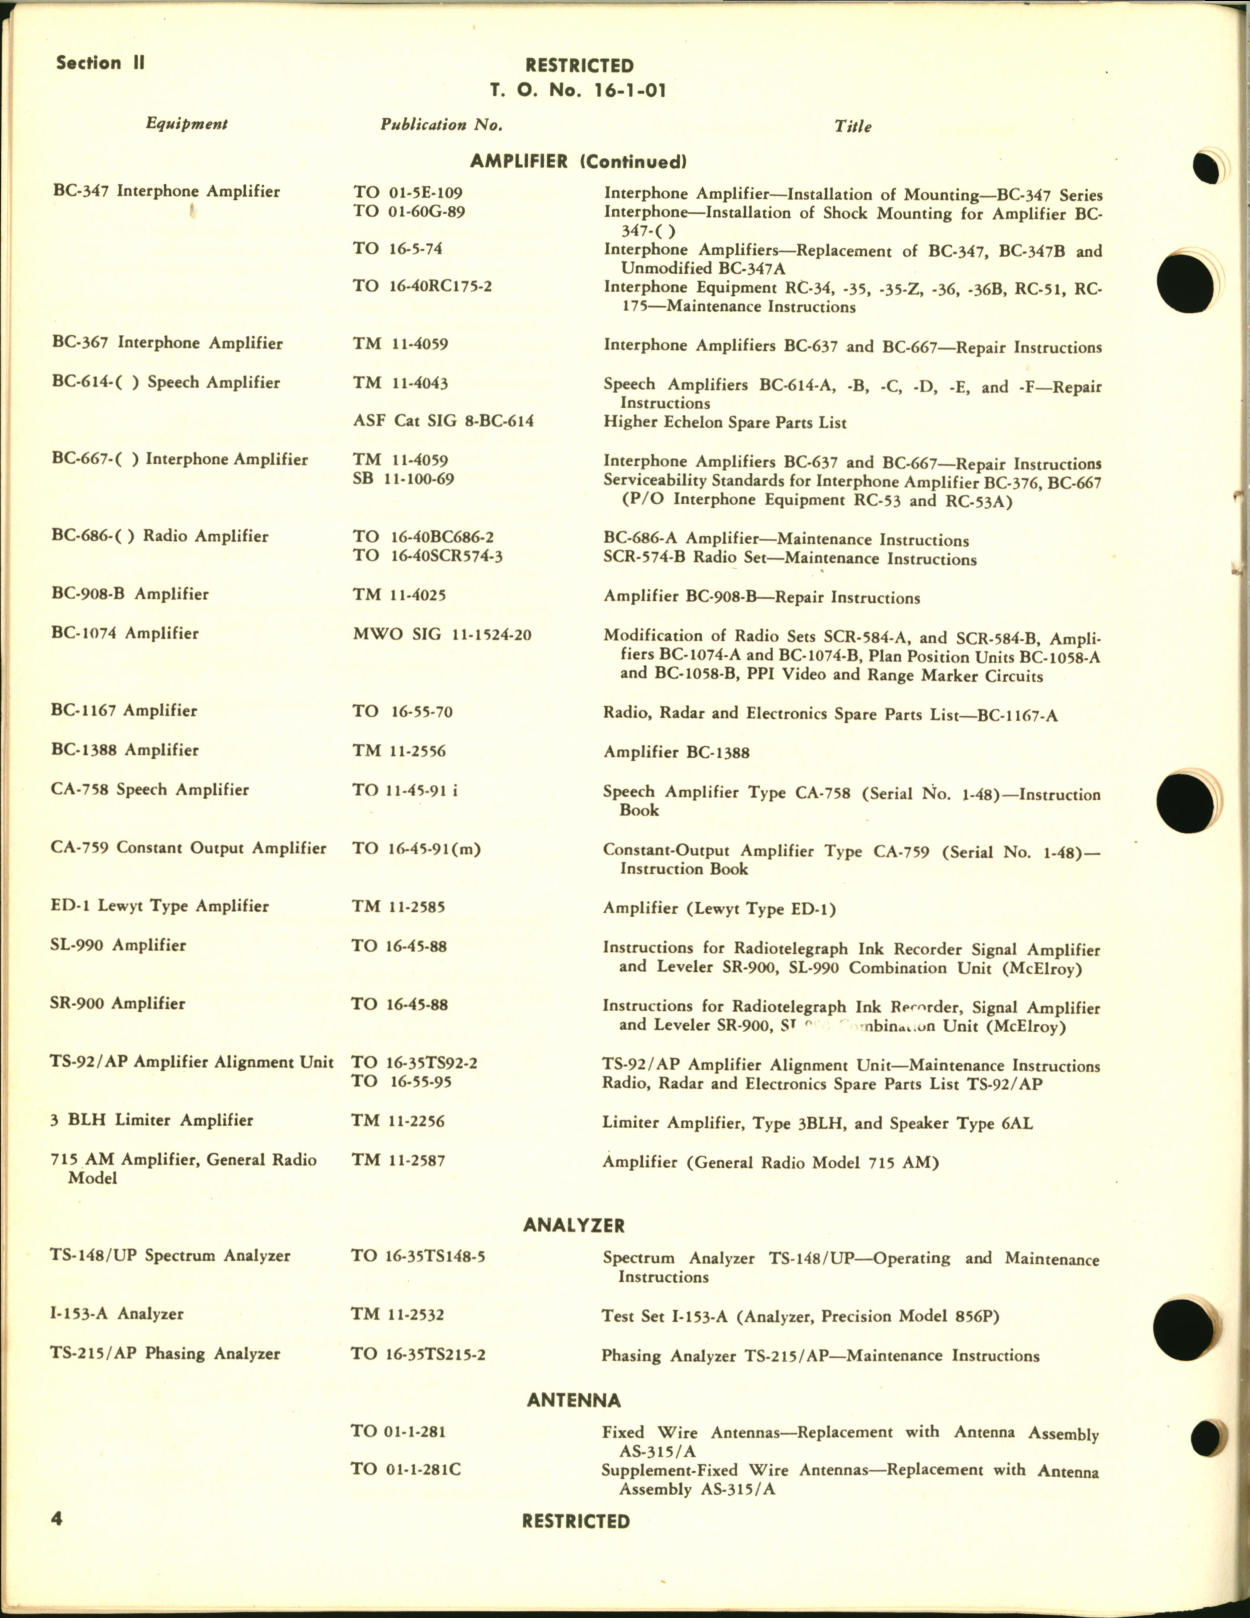 Sample page 6 from AirCorps Library document: List of Technical Publications - Communications Equipment